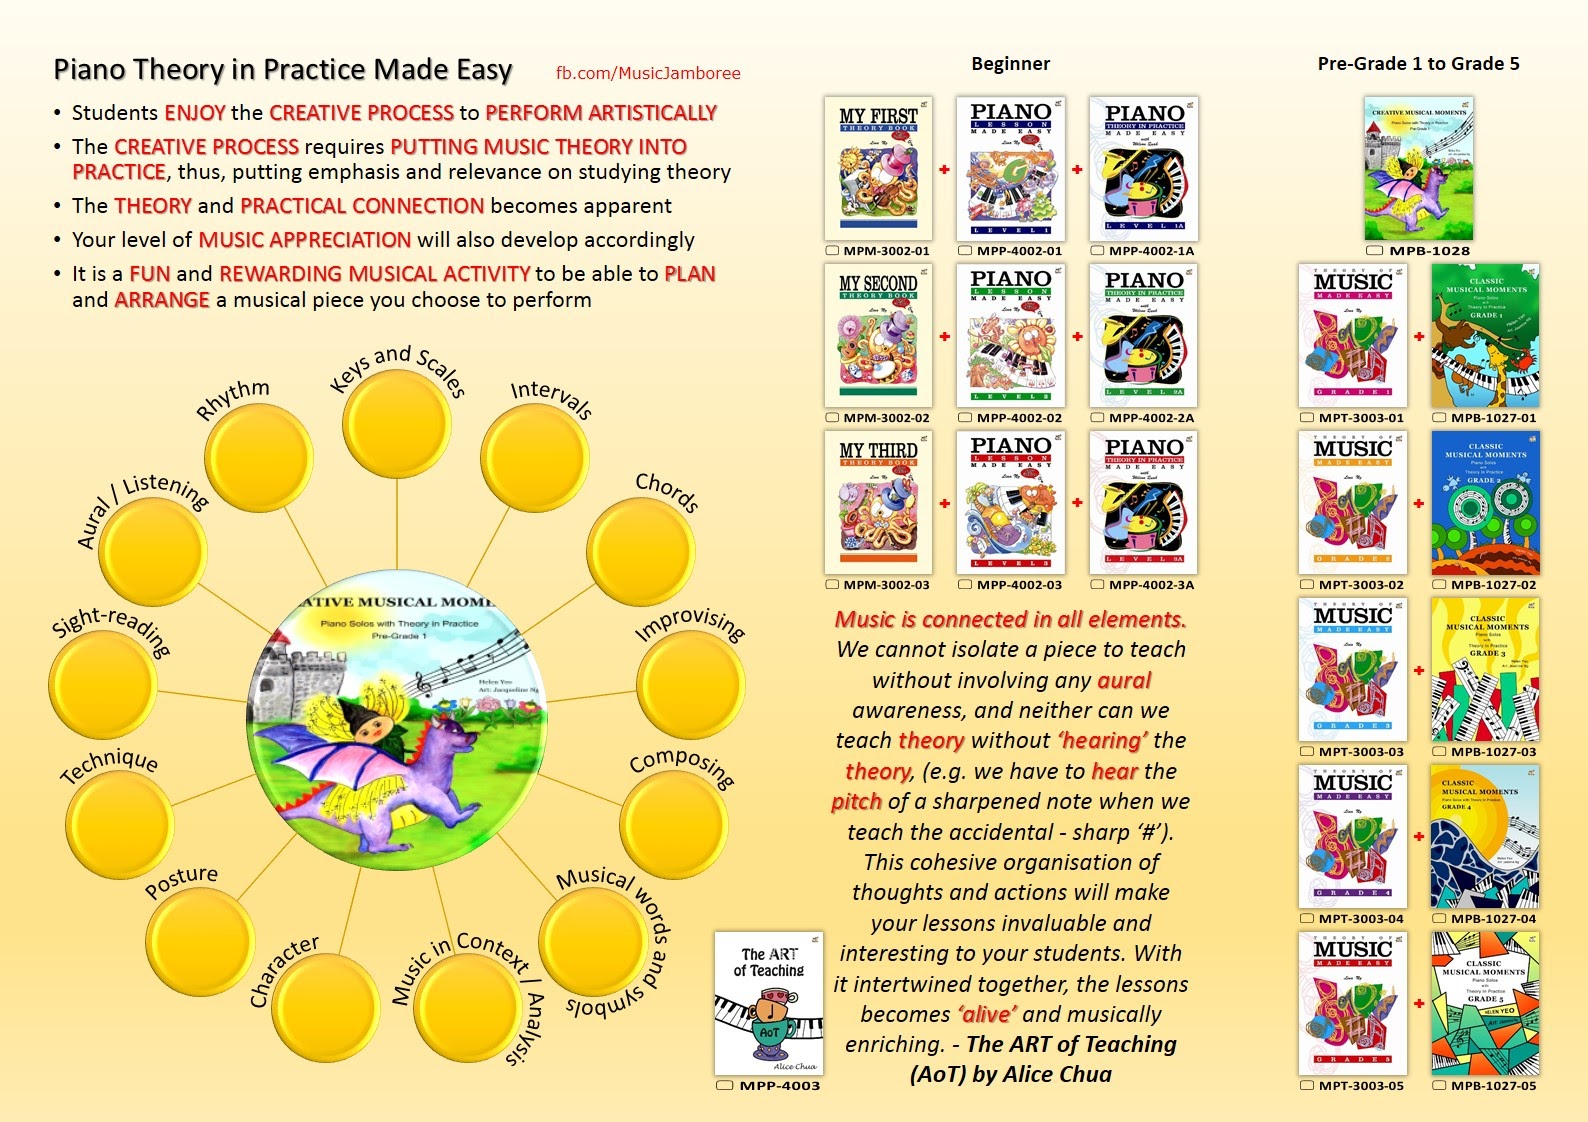 Theory Made Easy For Little Children Level 2 Book (New Edition)